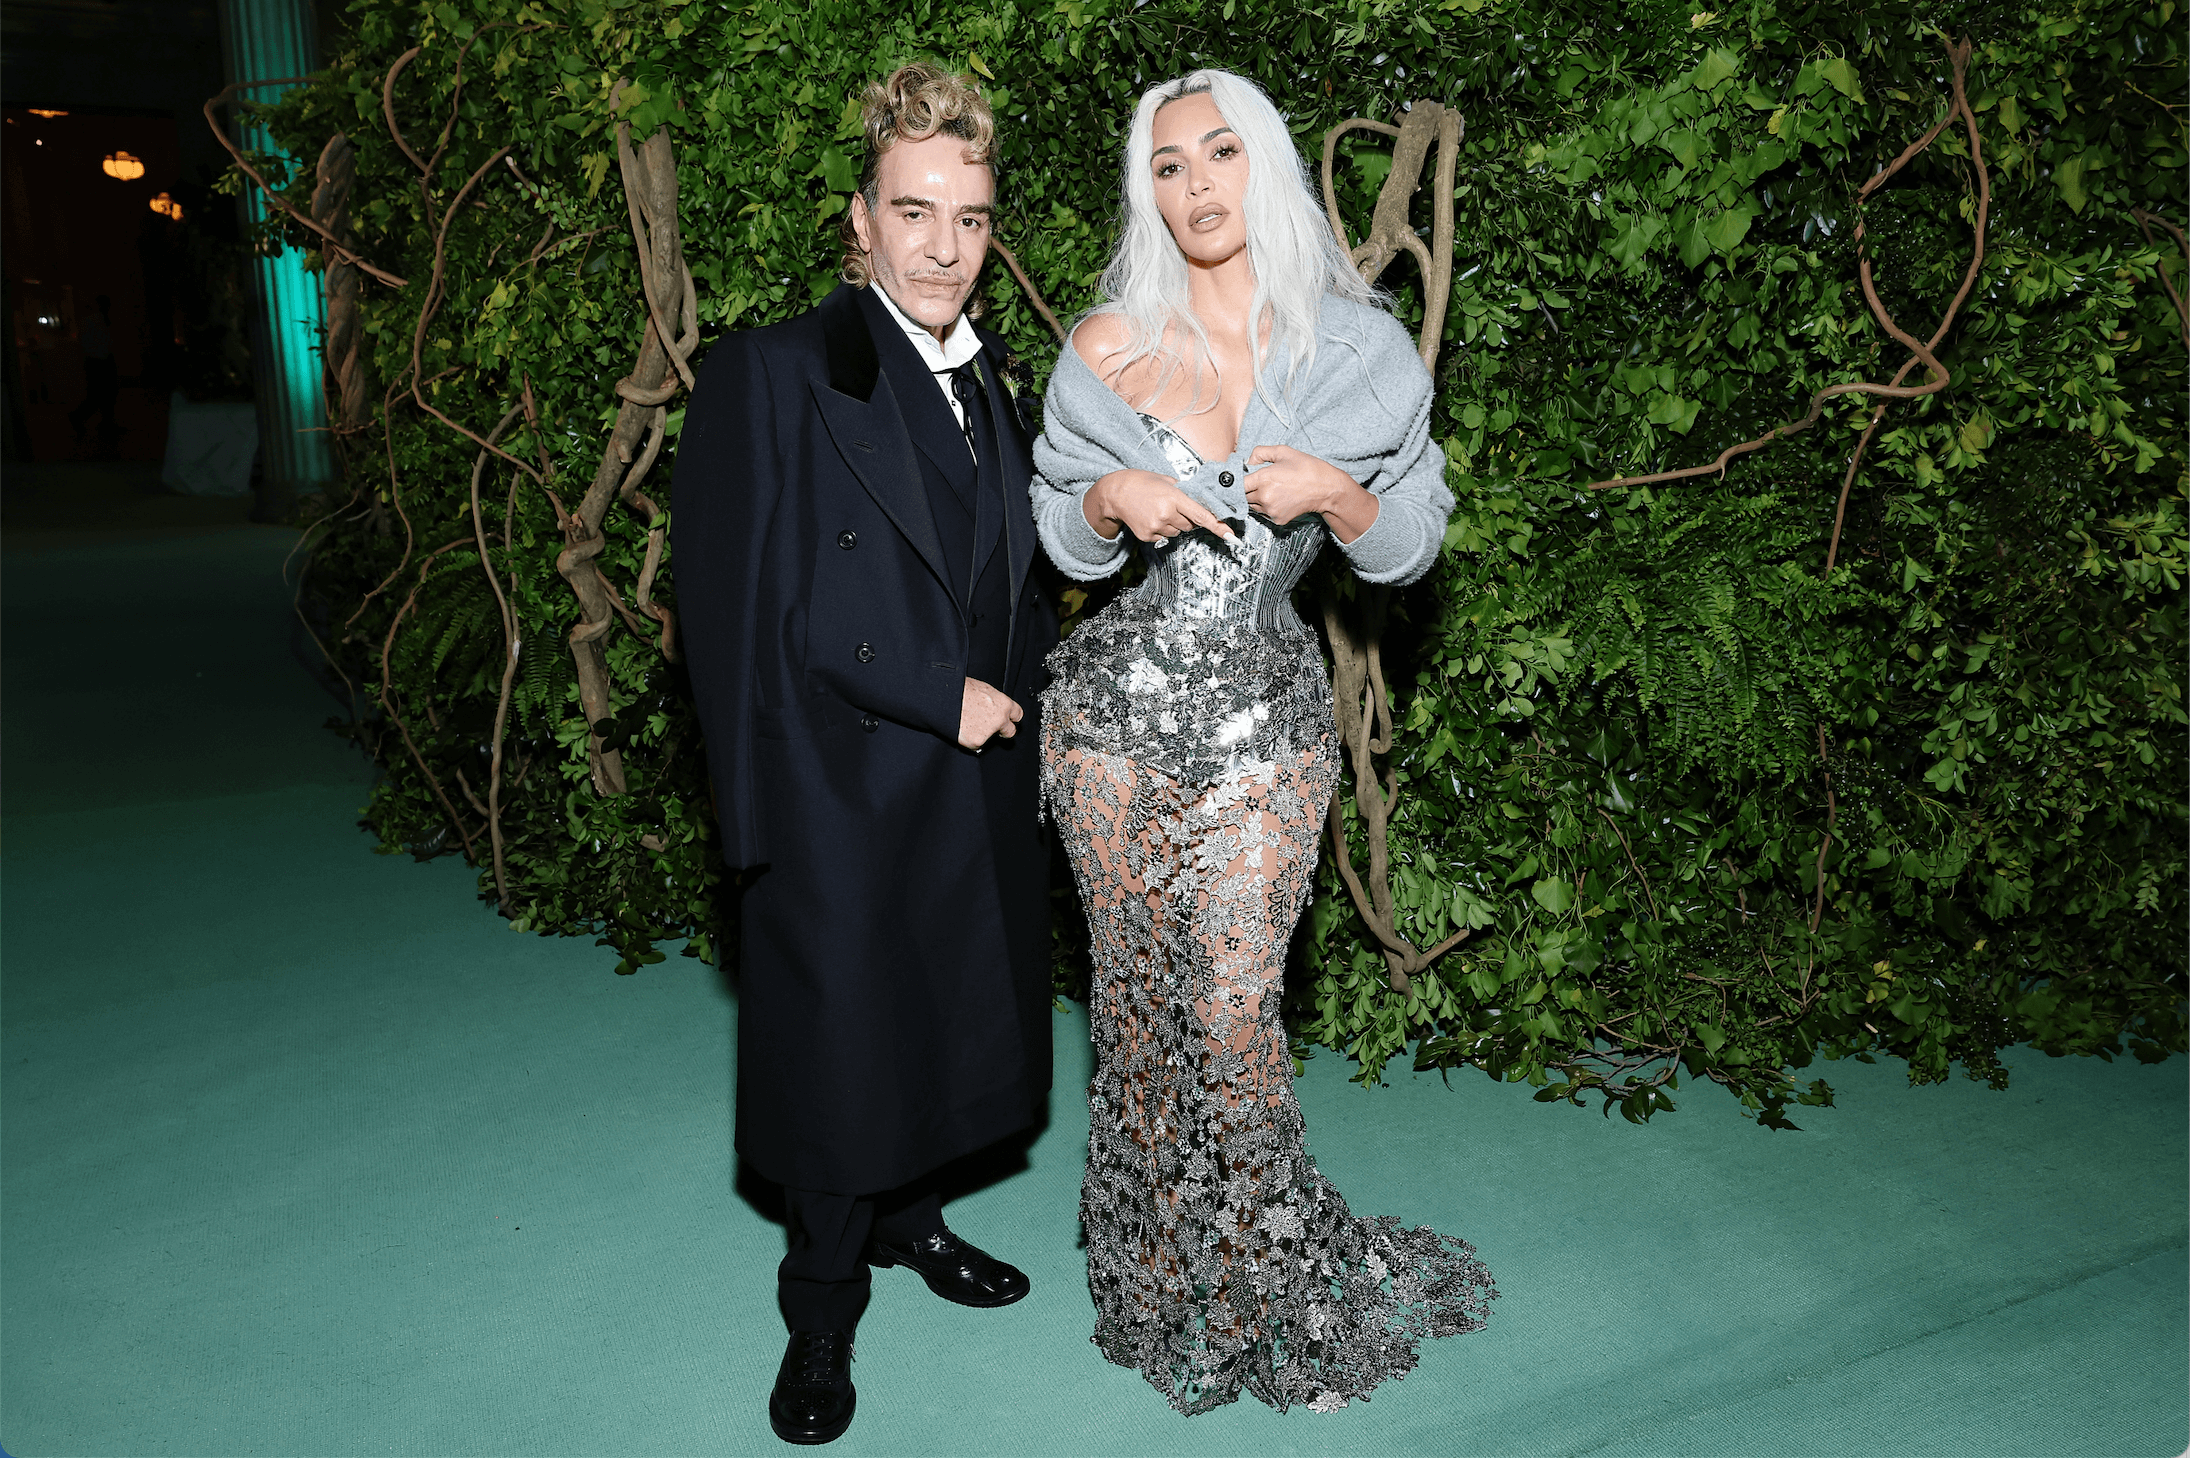 Met Gala icons wore the designs of someone with an antisemitic — but apologetic — past